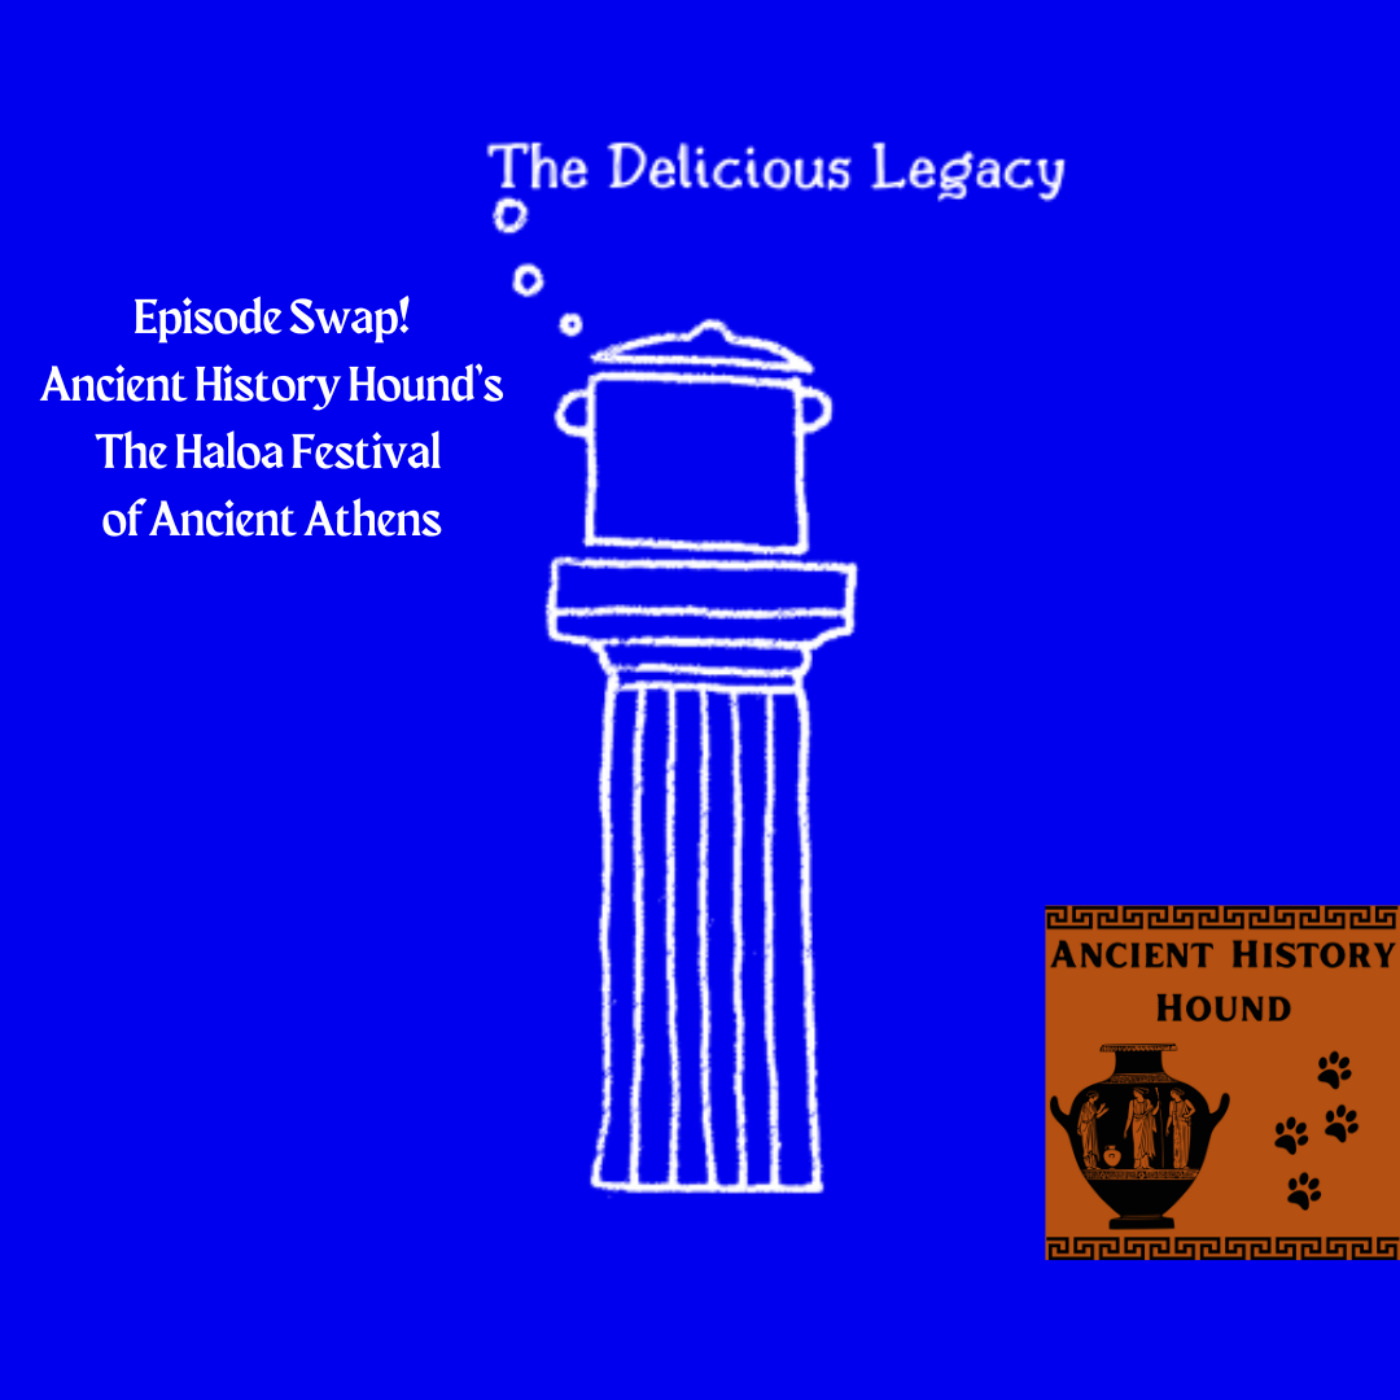 Episode Swap! The Haloa Festival  of Ancient Athens